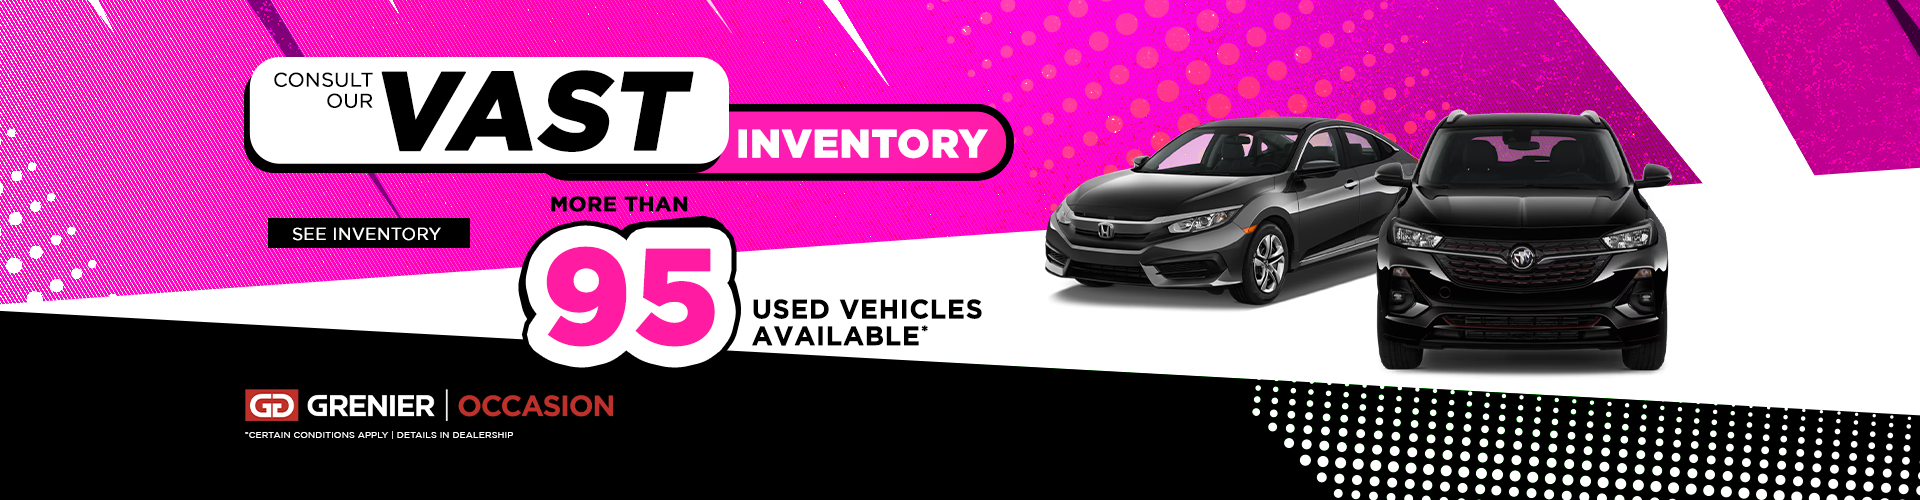 See our vast inventory!